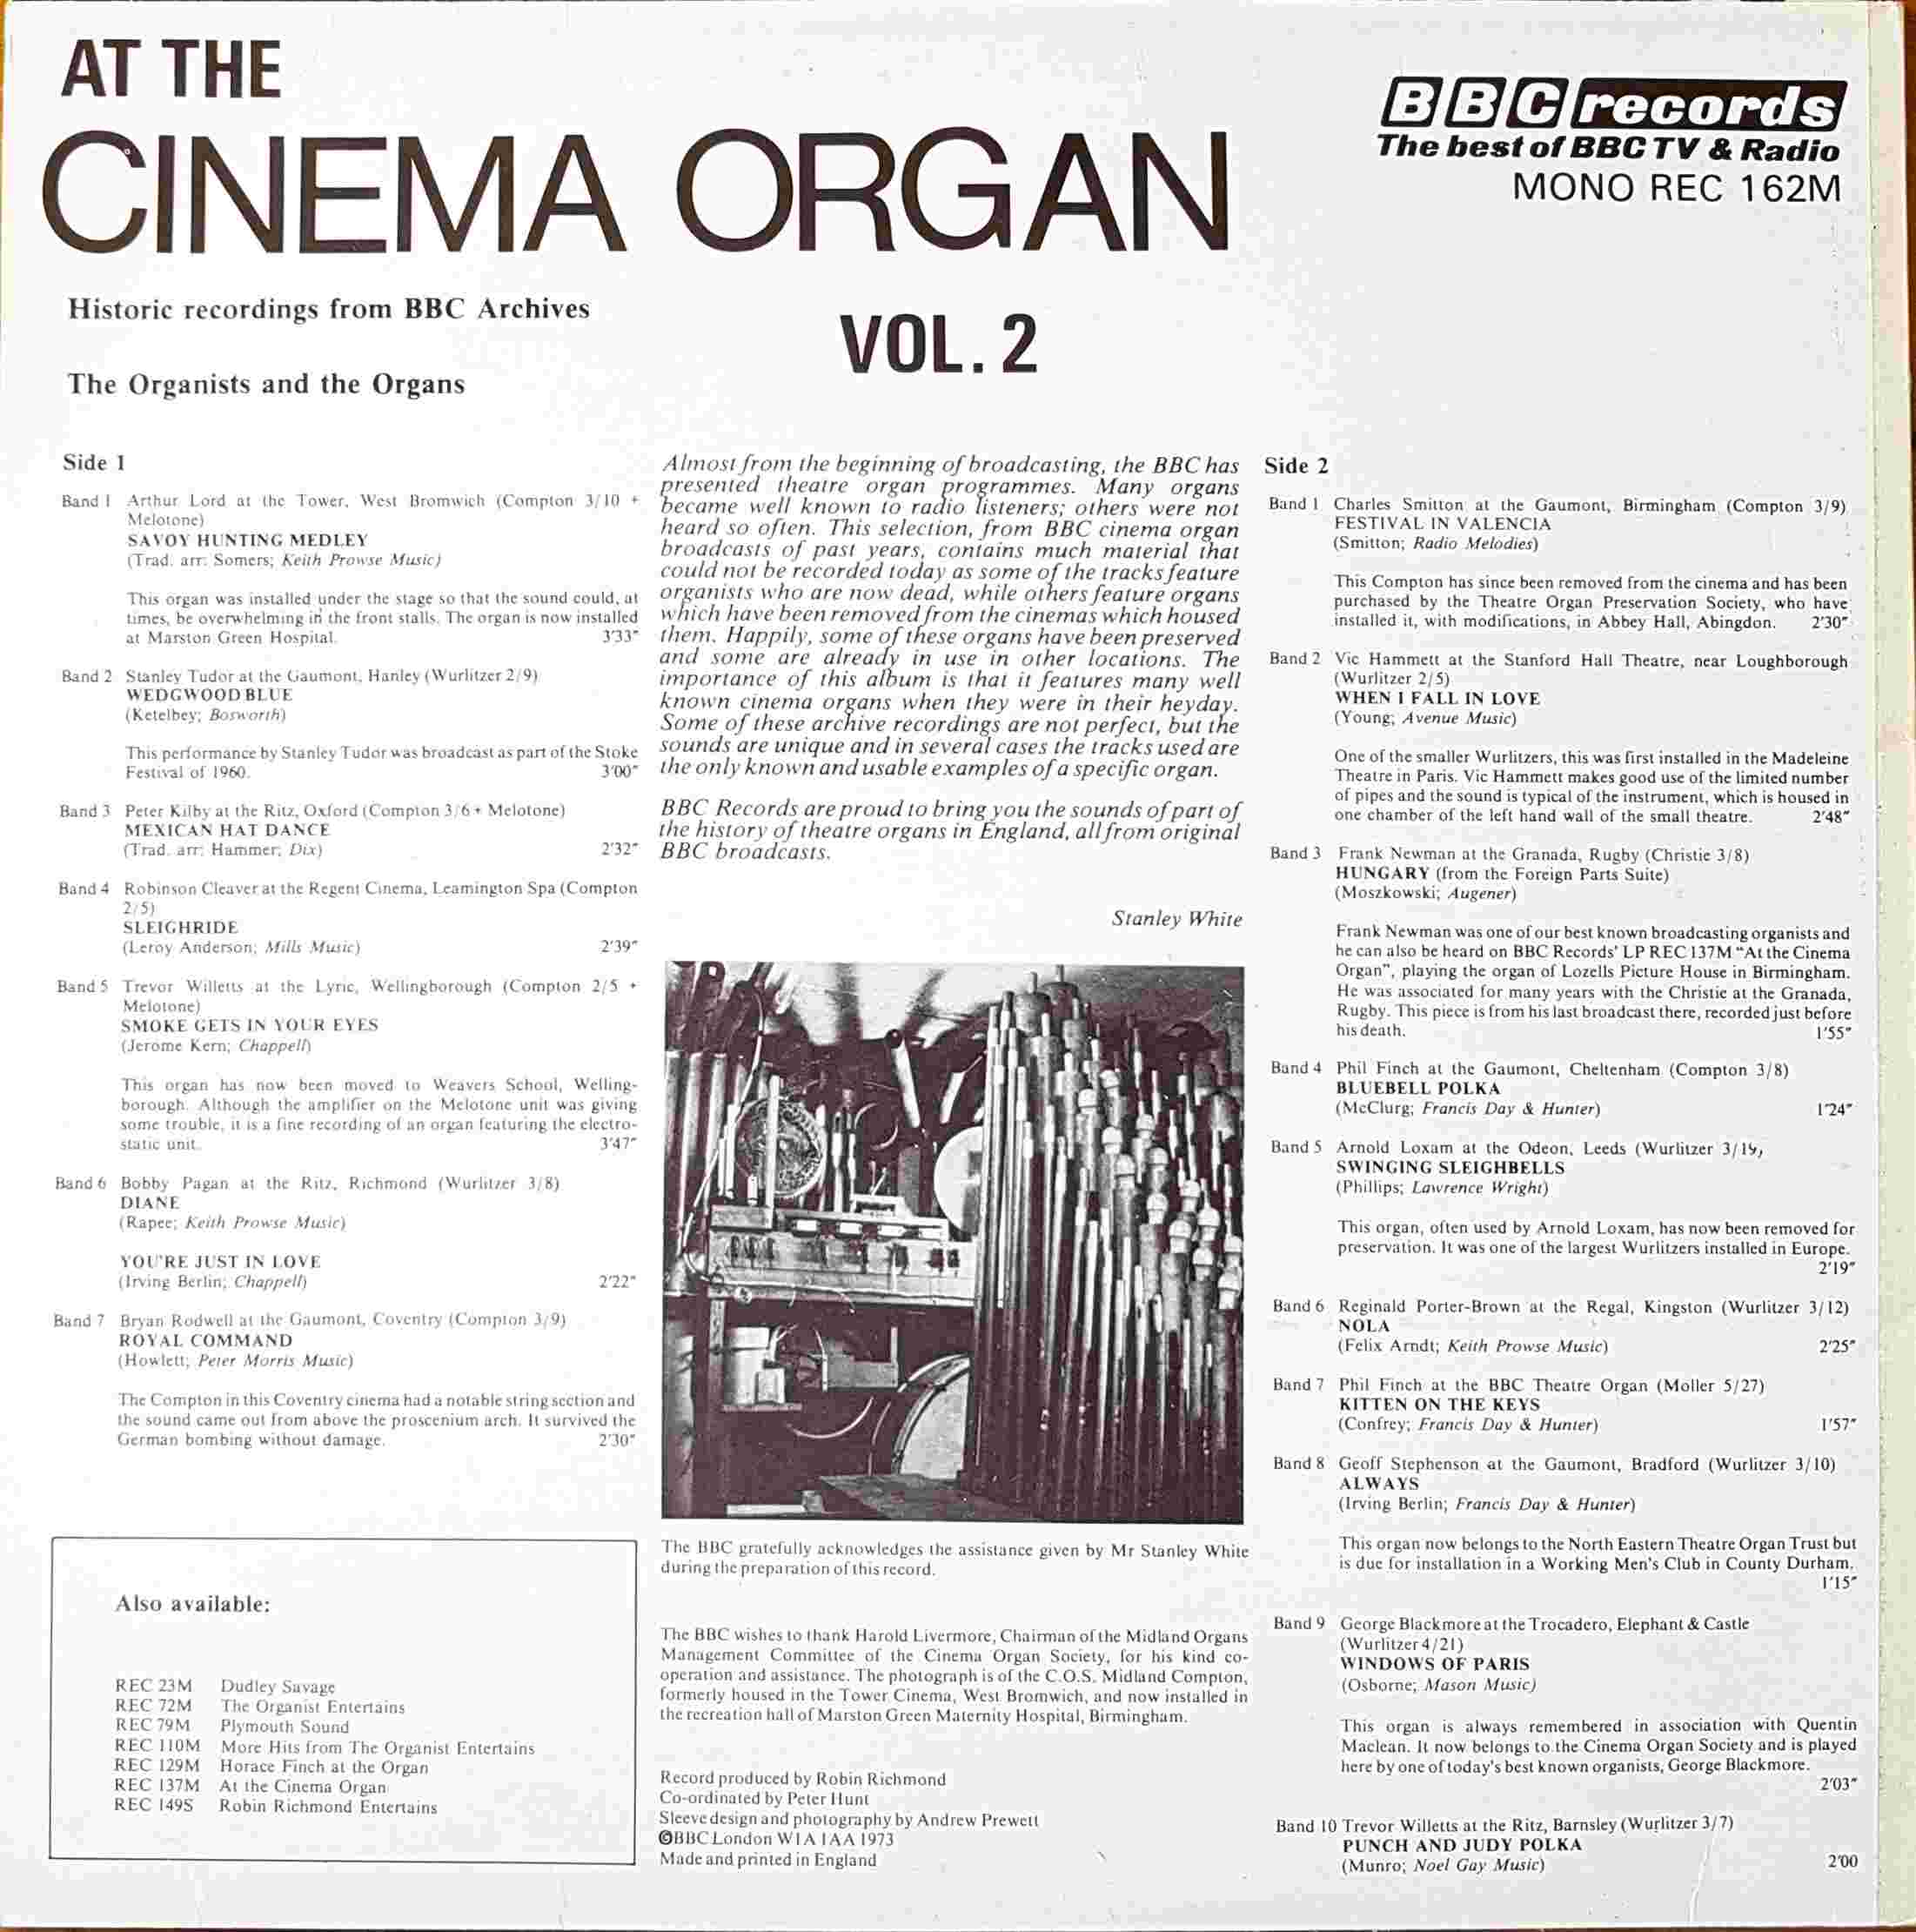 Picture of REC 162 At the cinema organ - Volume 2 by artist Various from the BBC records and Tapes library